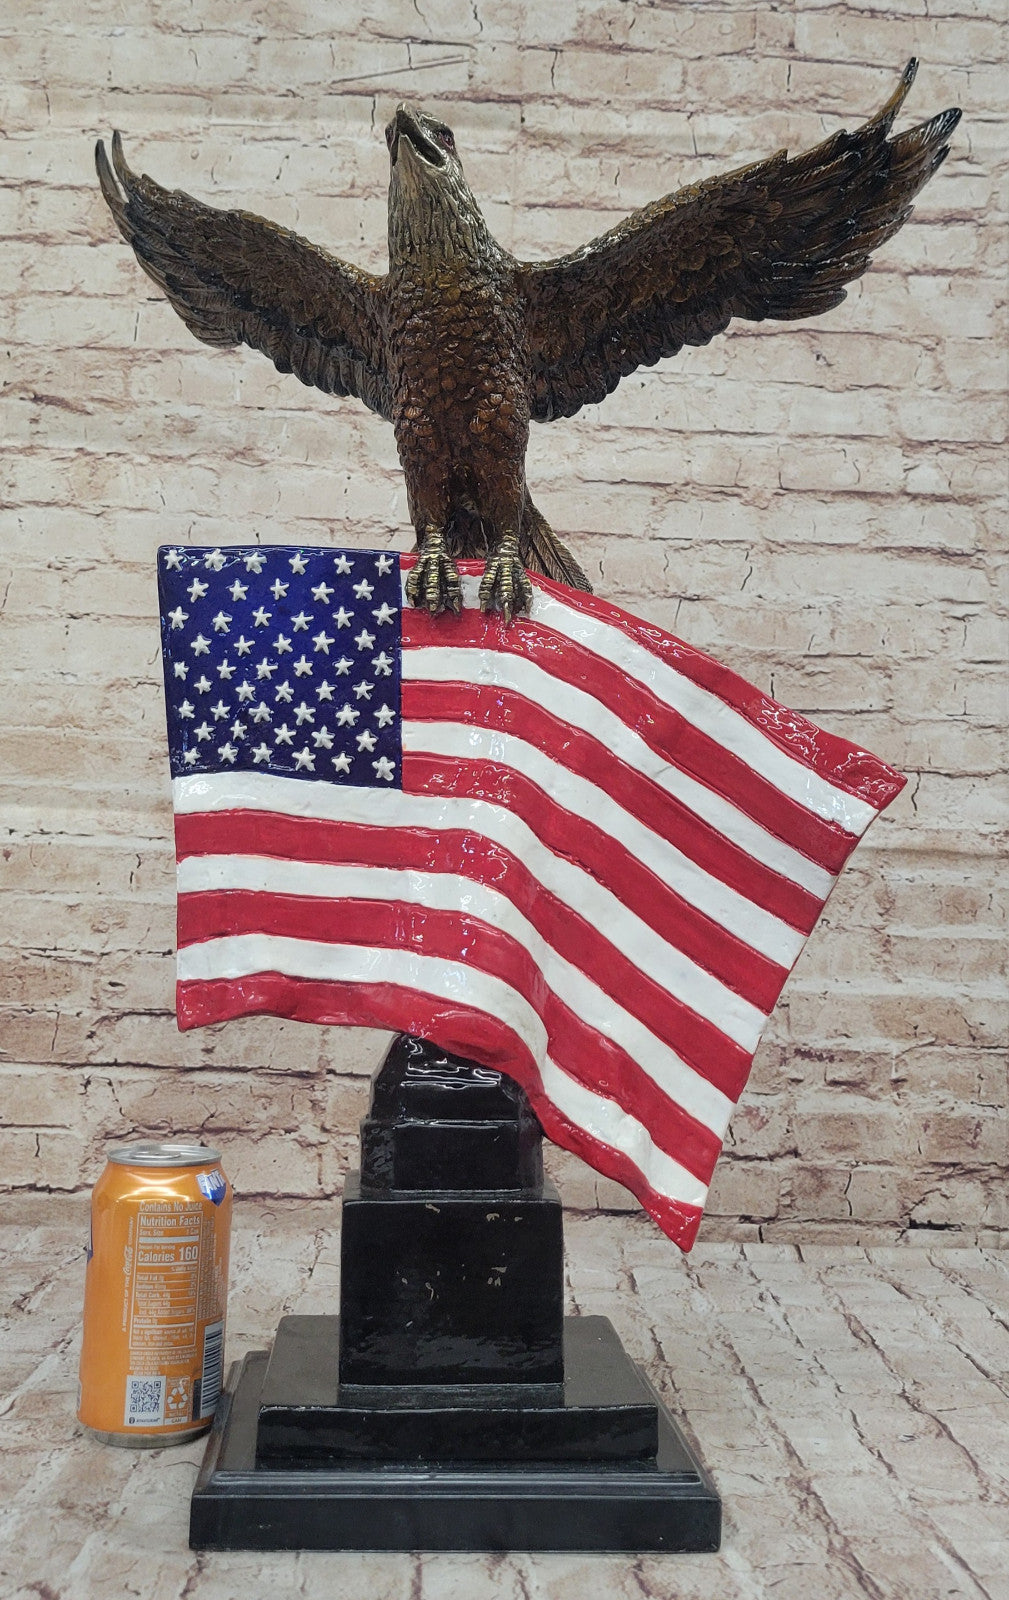 Moigniez Signed Bronze American Eagle Sculpture: USA Flag Statue Collectible